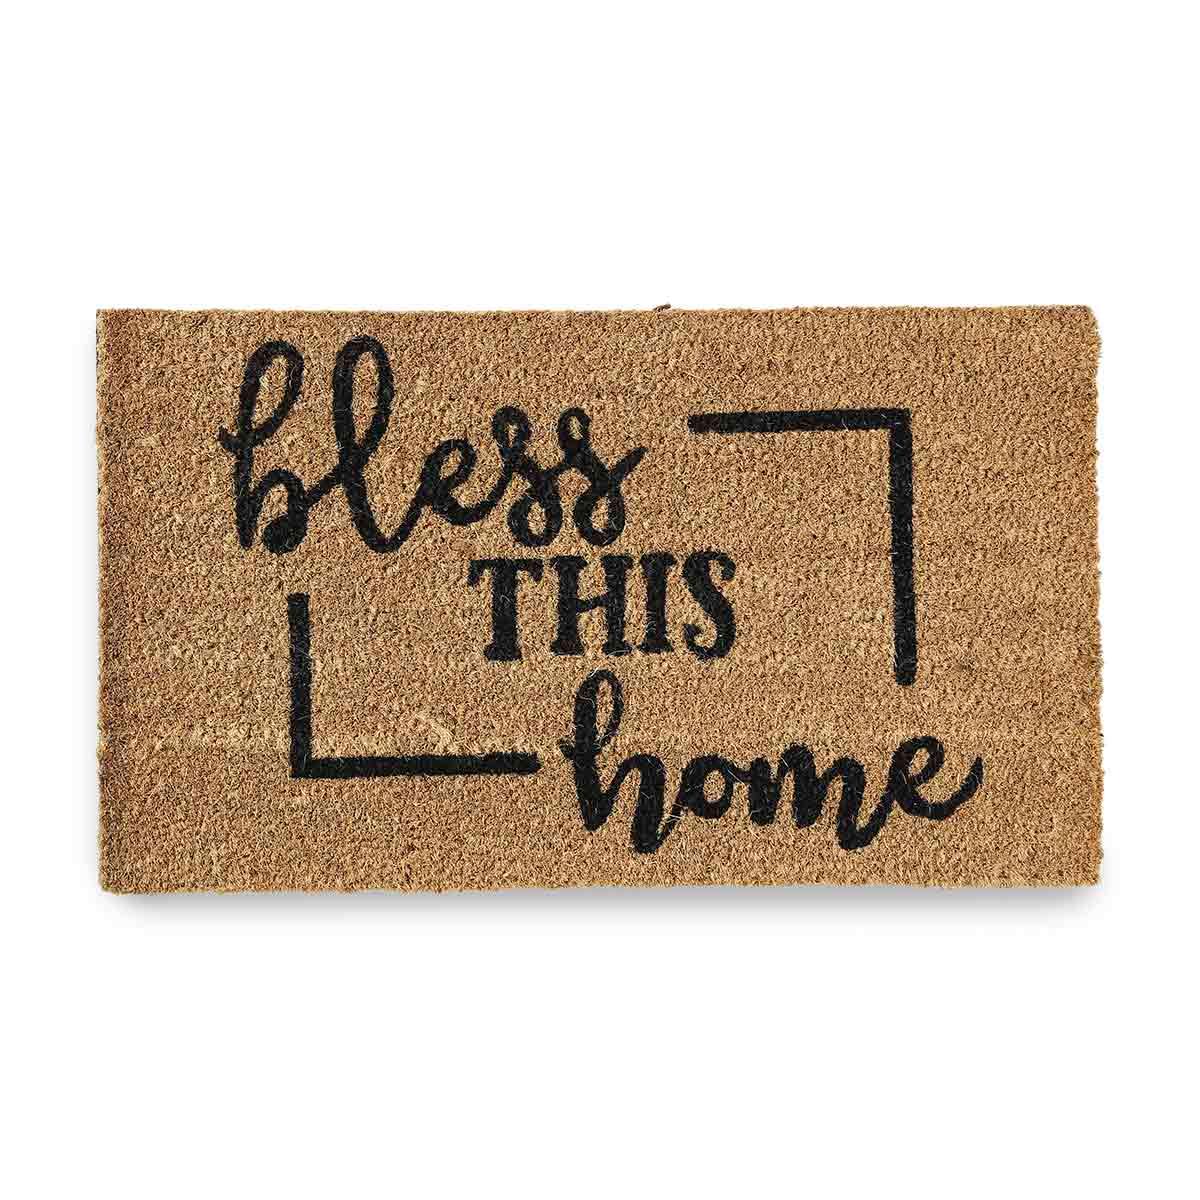 Bless This Home Printed Doormat - Home4u